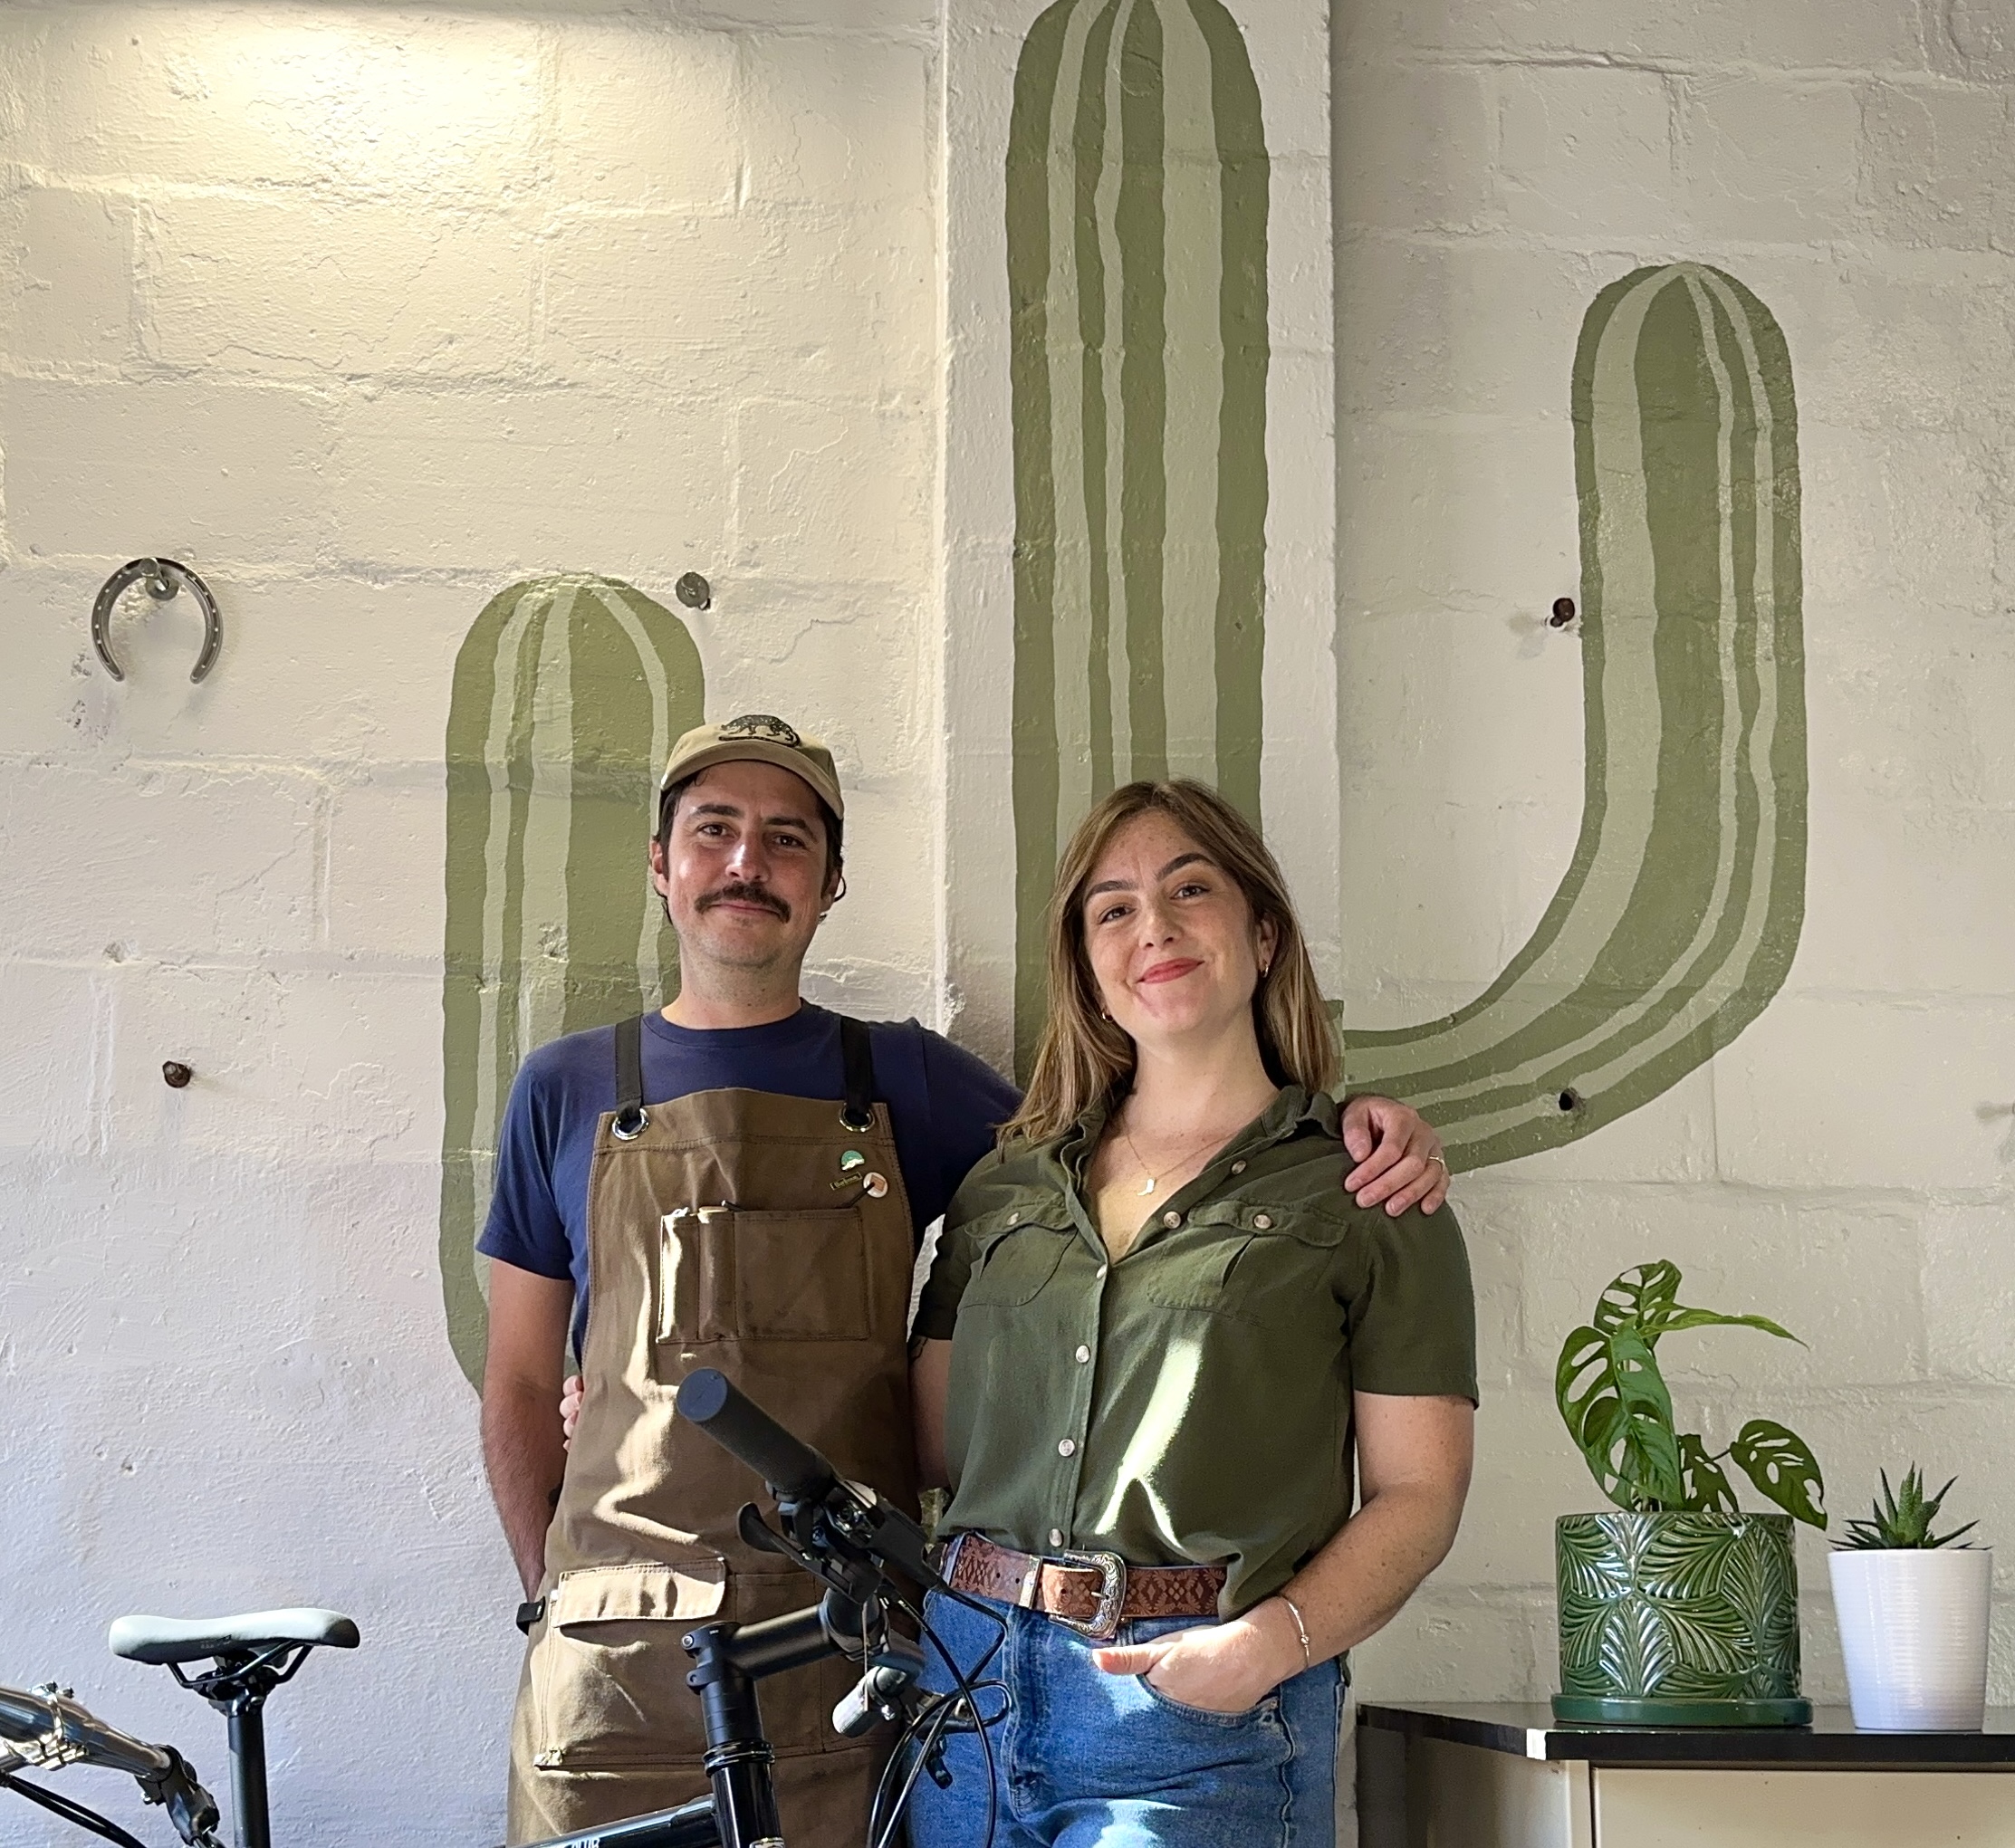 Introducing Our Team: Third Wheel - An inviting snapshot of two happy individuals, donning aprons while standing inside a café. A magnificent mural depicting a cactus serves as the backdrop to their joyous scene.